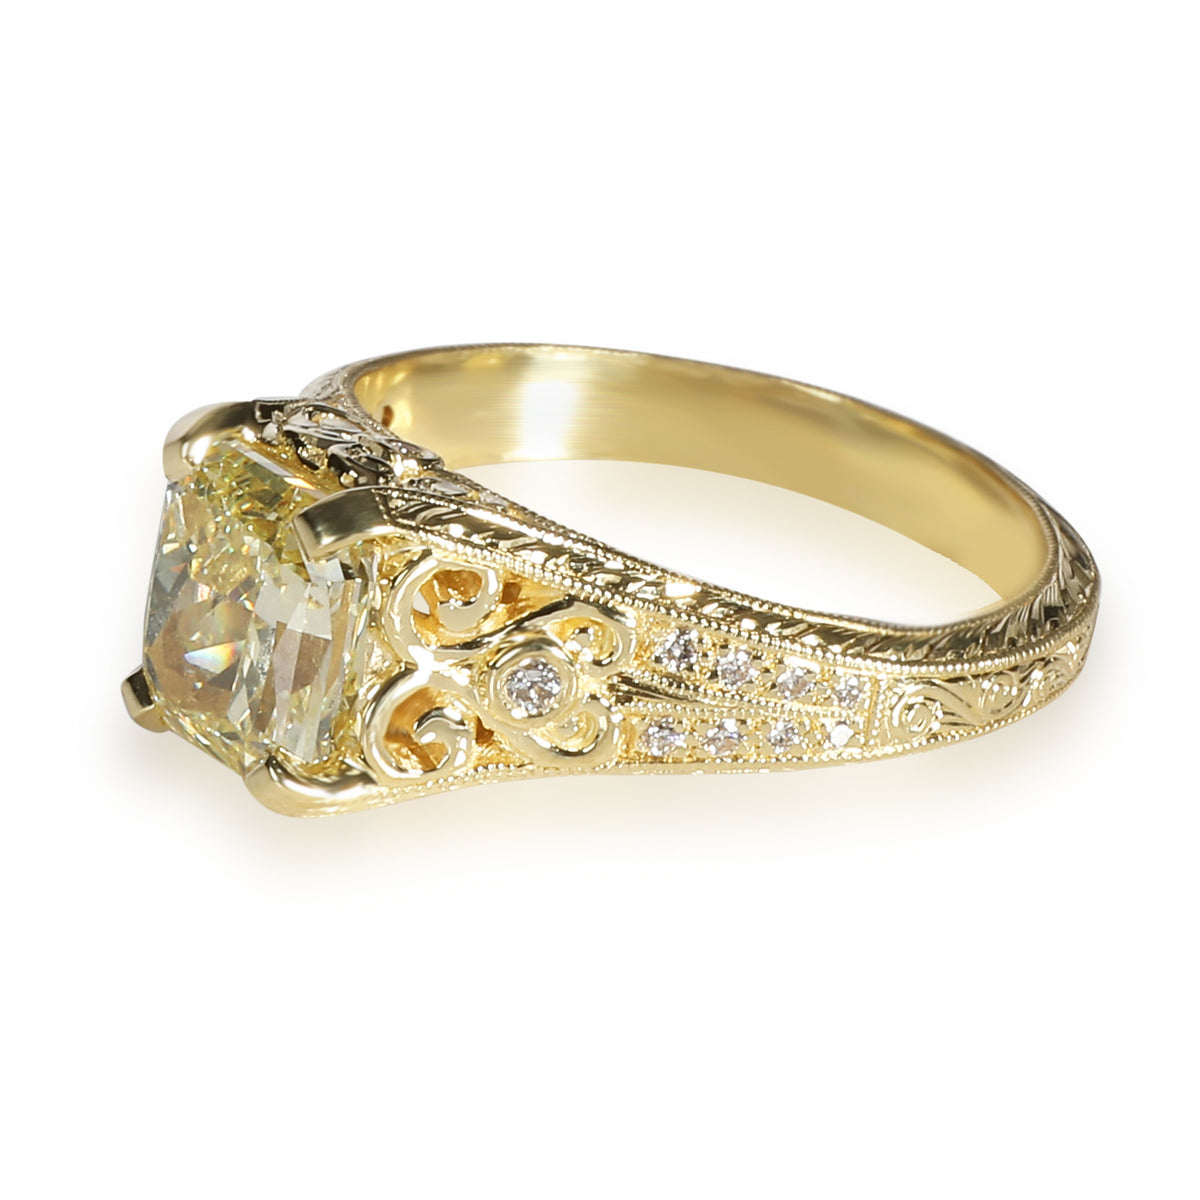 Fancy Yellow Radiant Diamond Engagement Ring in 18K Yellow Gold SI1 1.71 CTW